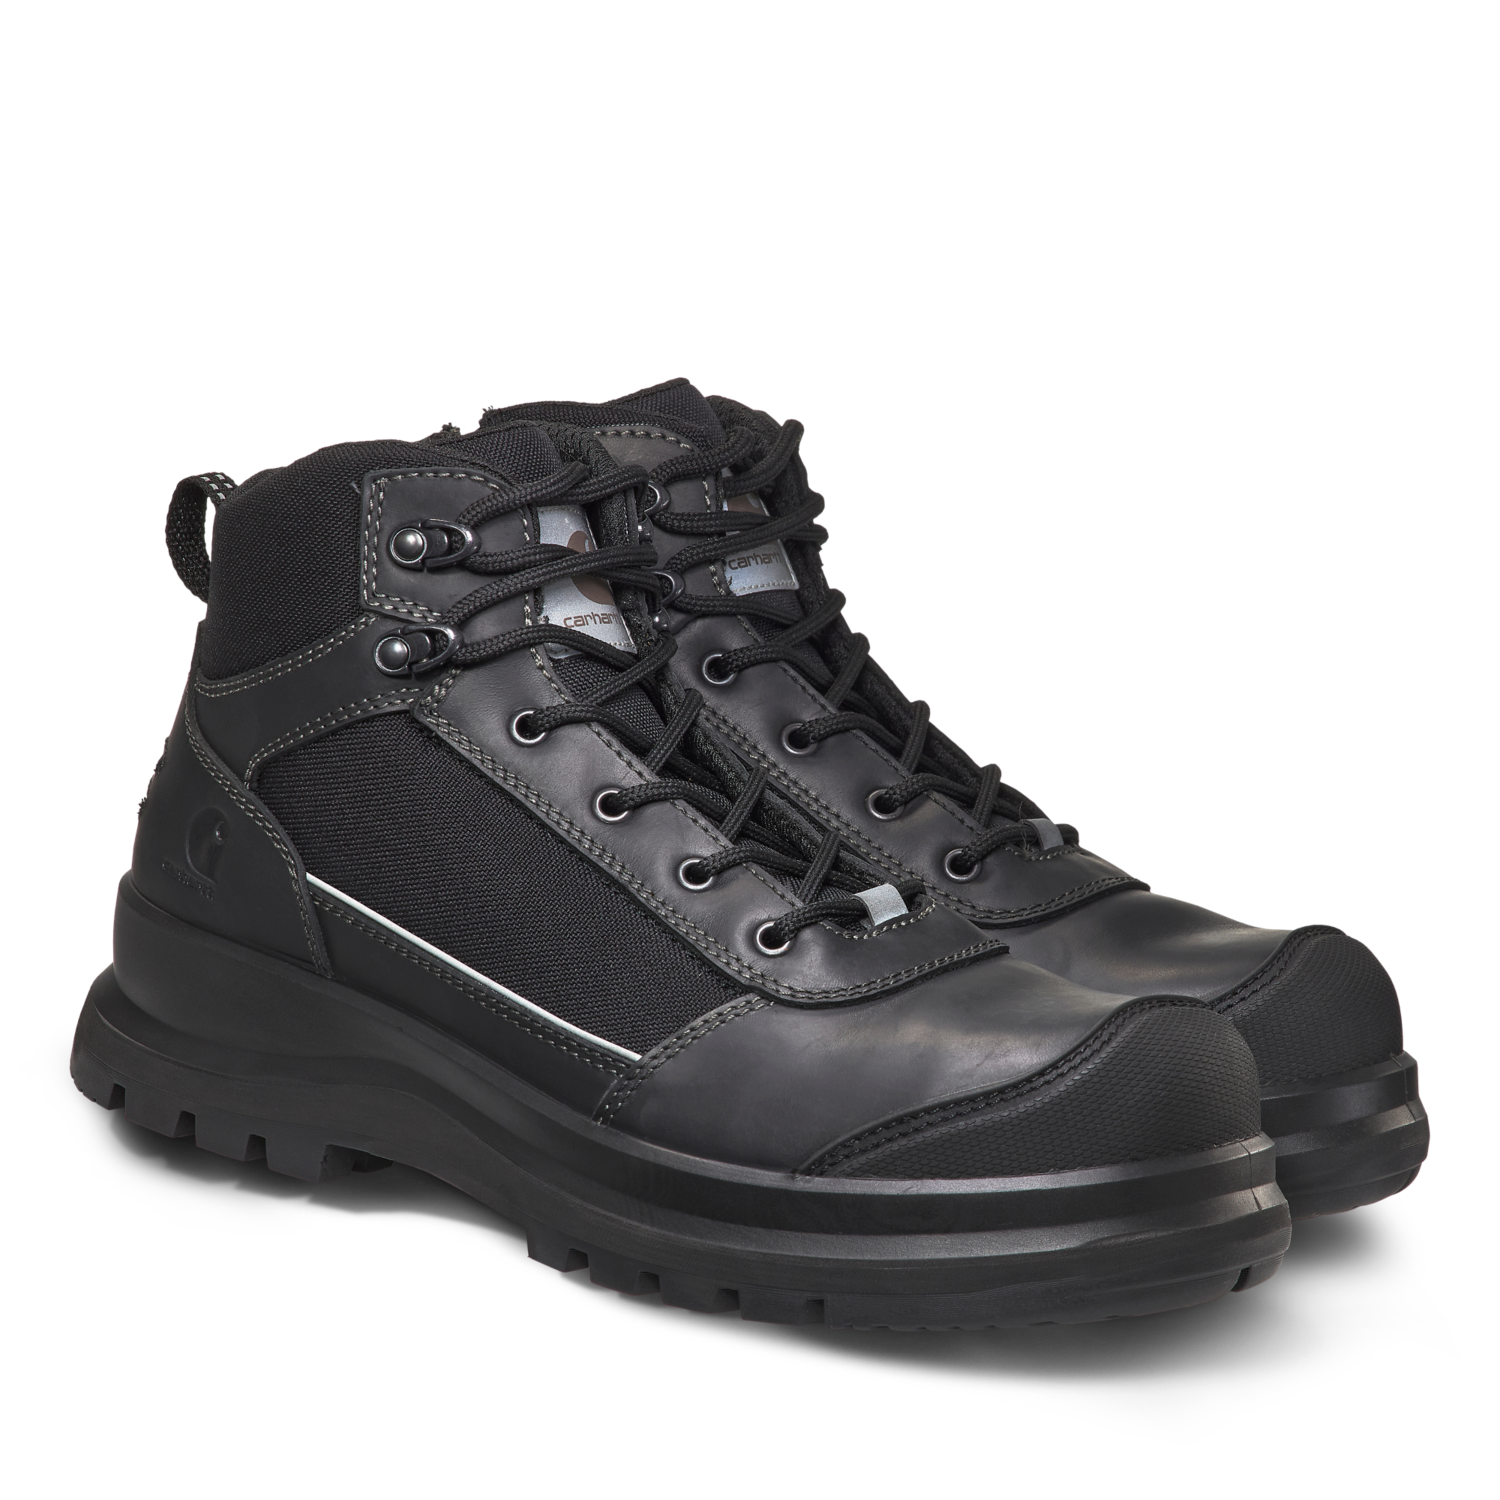 DETROIT_REFLECTIVE_S3_ZIP_SAFETY_BOOT_rvWVdYMx7m